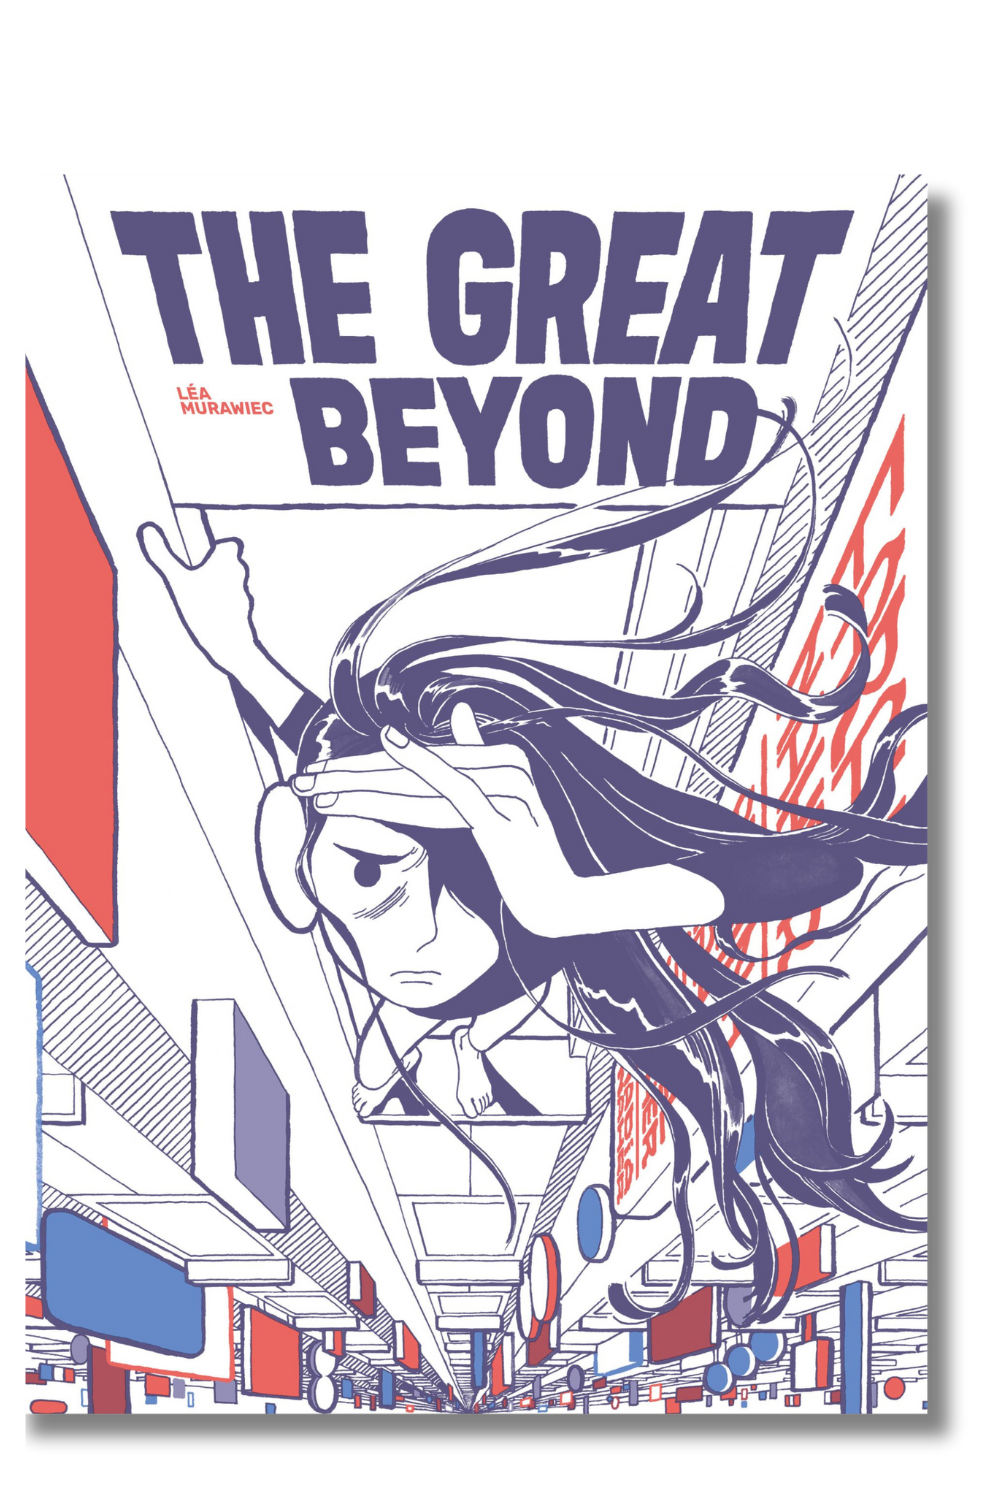 The cover of "The Great Beyond" by Lea Murawiec, translated by Aleshia Jensen